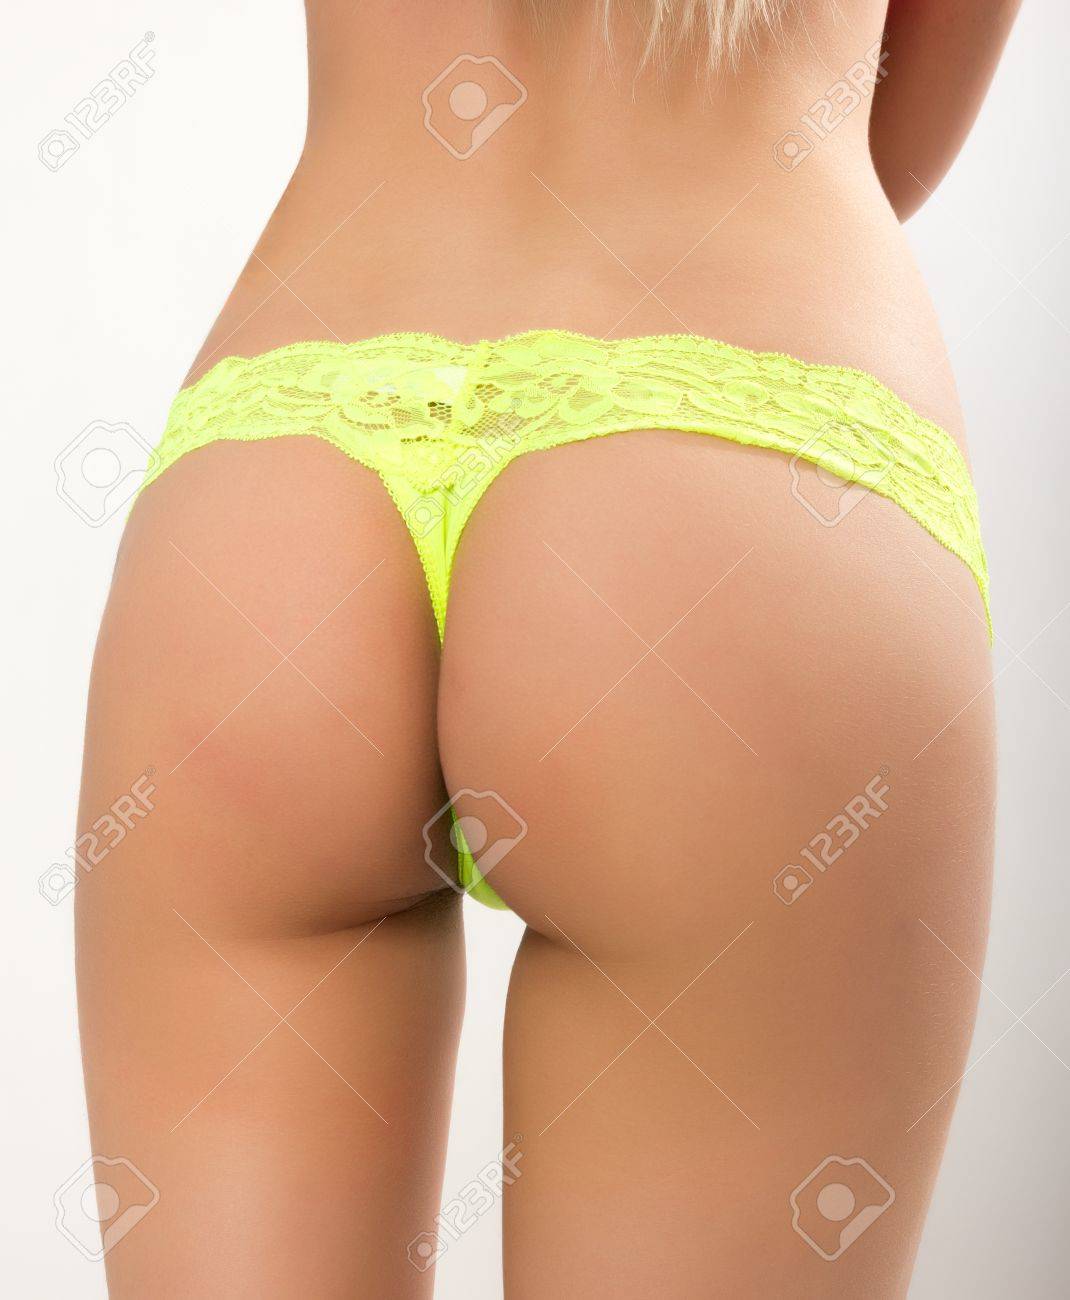 carlo peregrina recommends tiny ass in panties pic